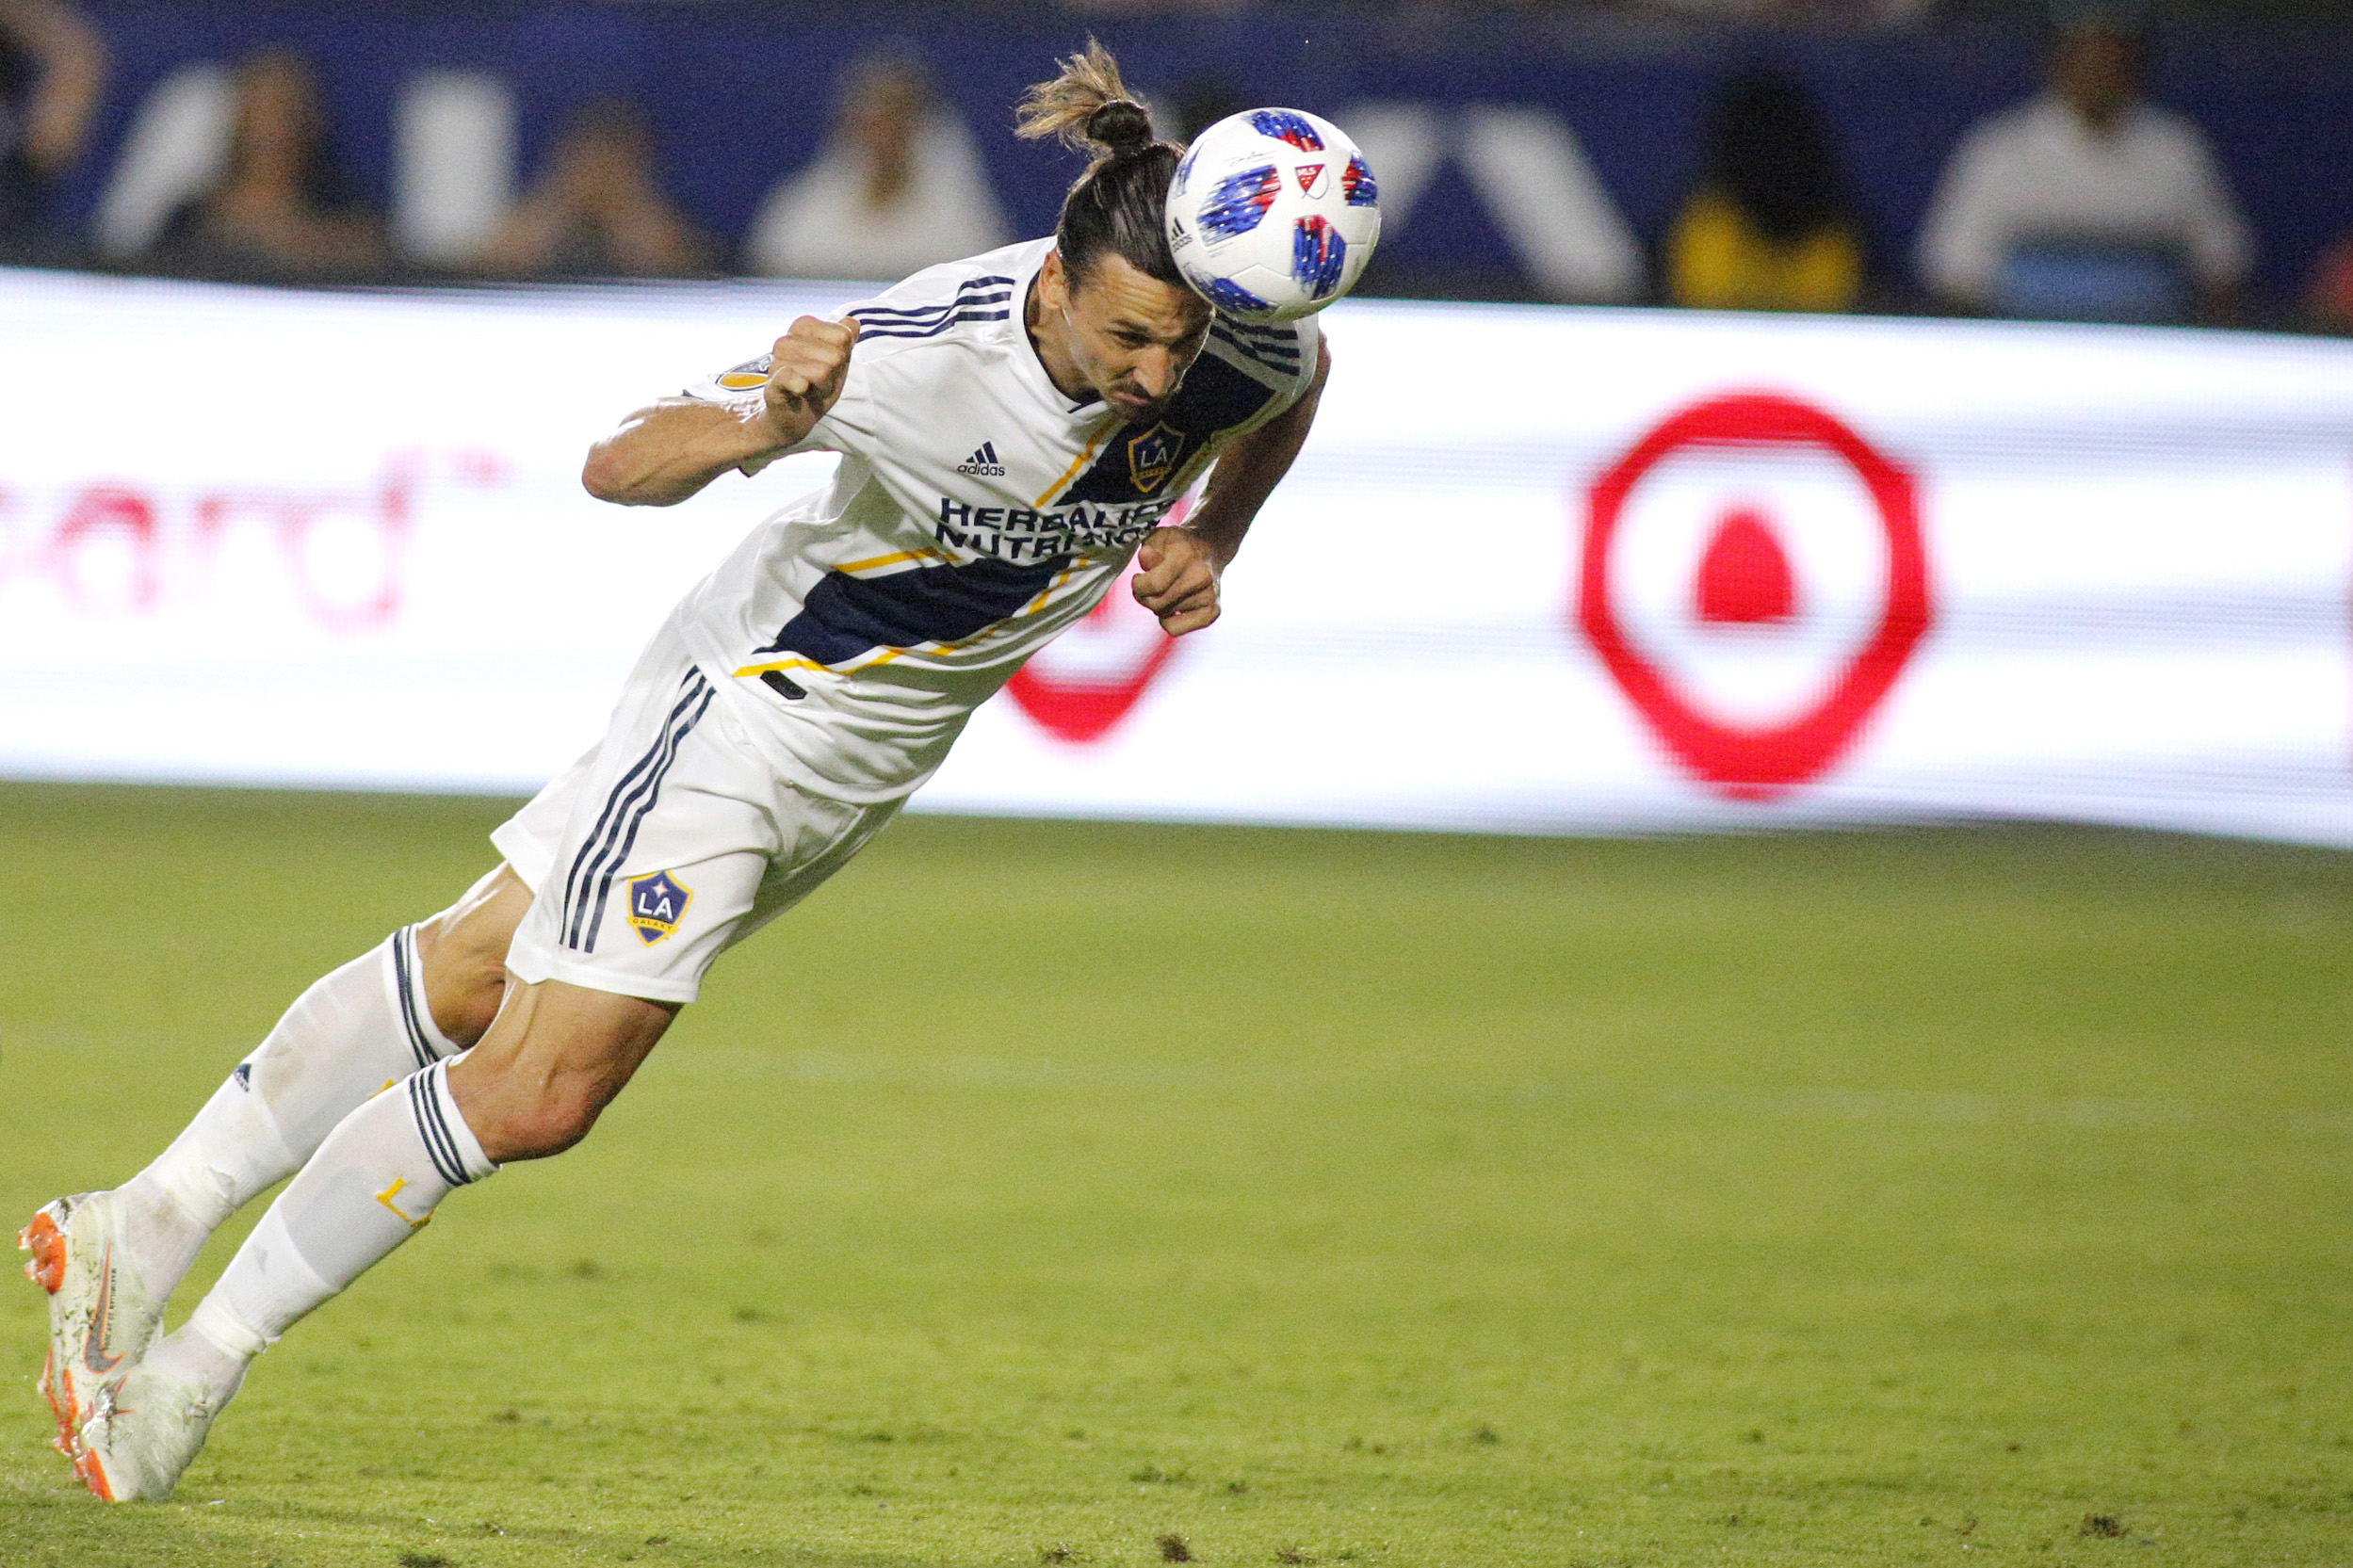 CARSON, CA - JULY 29:  Zlatan Ibrahimovic #9 of the Los Angeles Galaxy heads the ball into the goal at StubHub Center on July 29, 2018 in Carson, California. (Photo by Katharine Lotze/Getty Images)